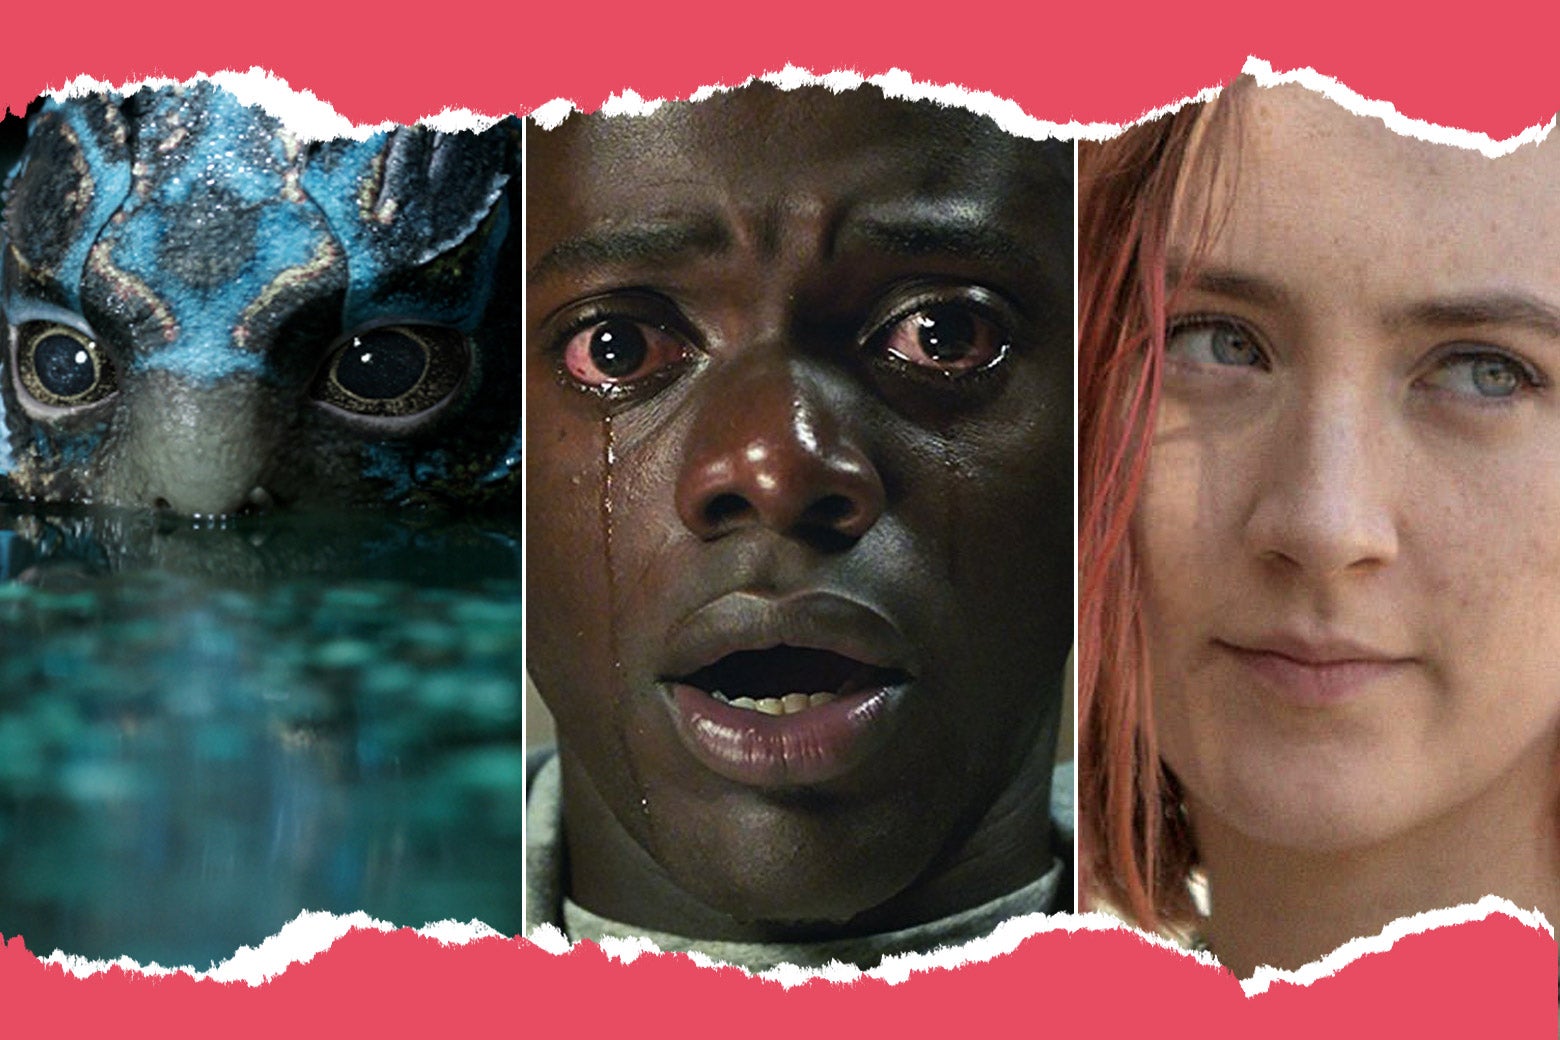 Stills from The Shape of Water, Get Out, and Ladybird.